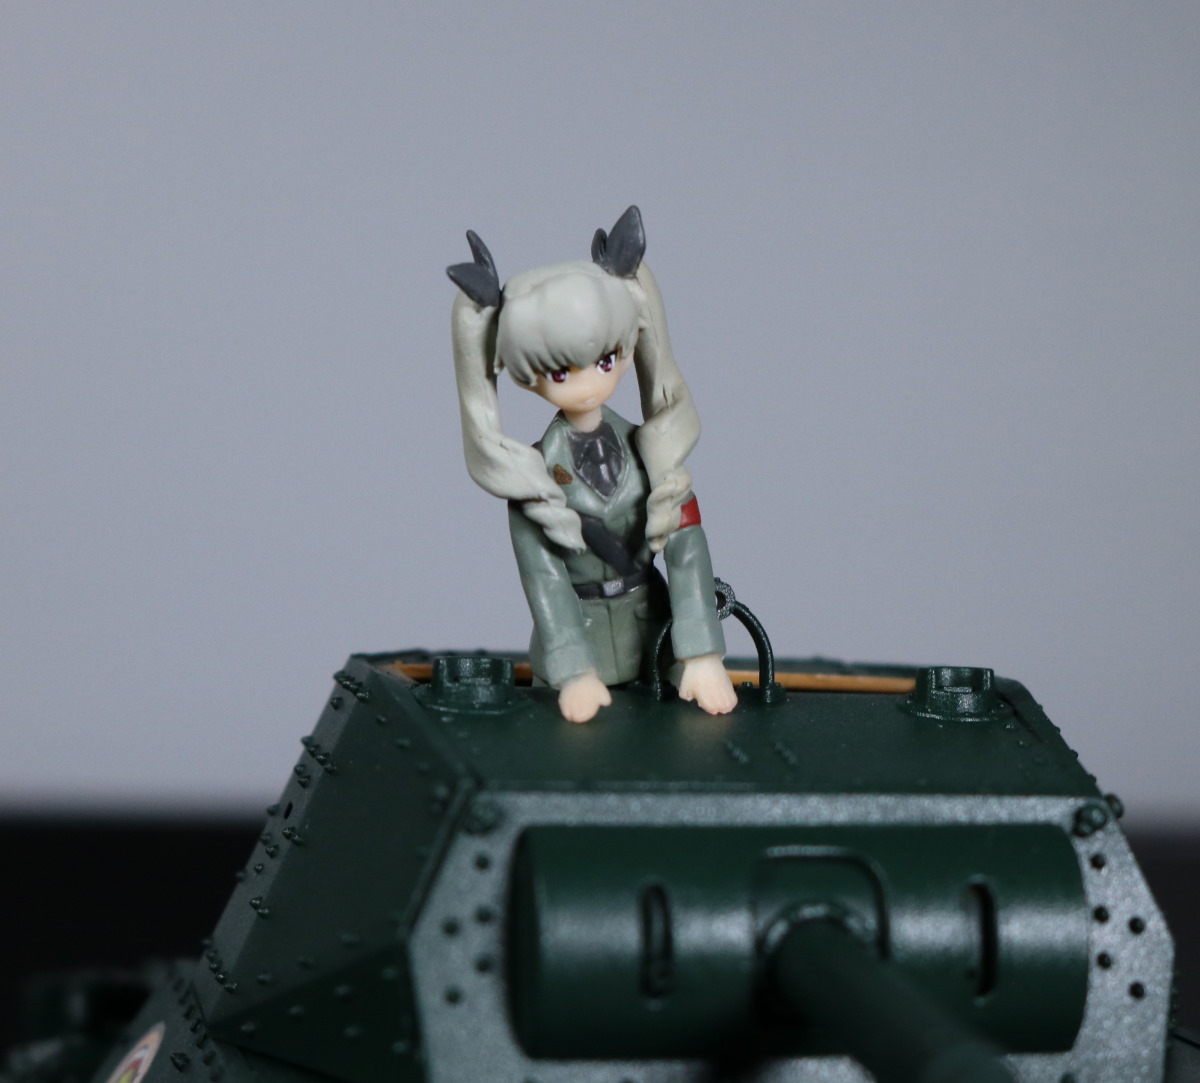 Anchovy 1/35 scale by IKAROS publications LTD